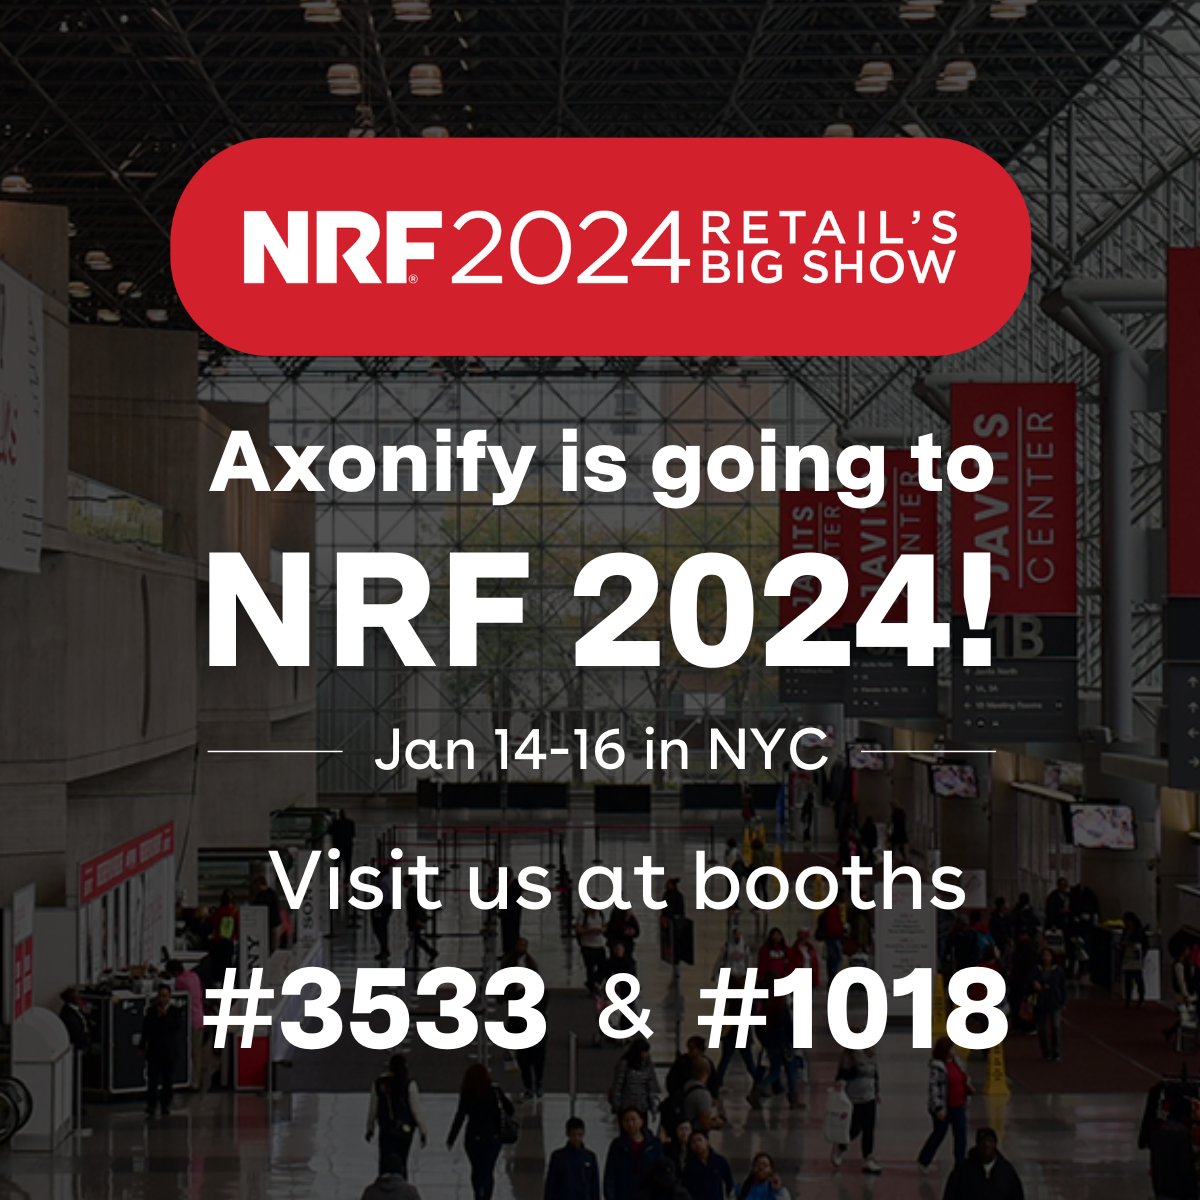 Get ready for more Big Ideas from Axonify at @NRFnews 2024 this January! We'll discuss how we’re built for the #retail frontline and connect on the future of the industry. Use code 2803 to save on your ticket: nrfbigshow.nrf.com/register?utm_s… #NRF2024